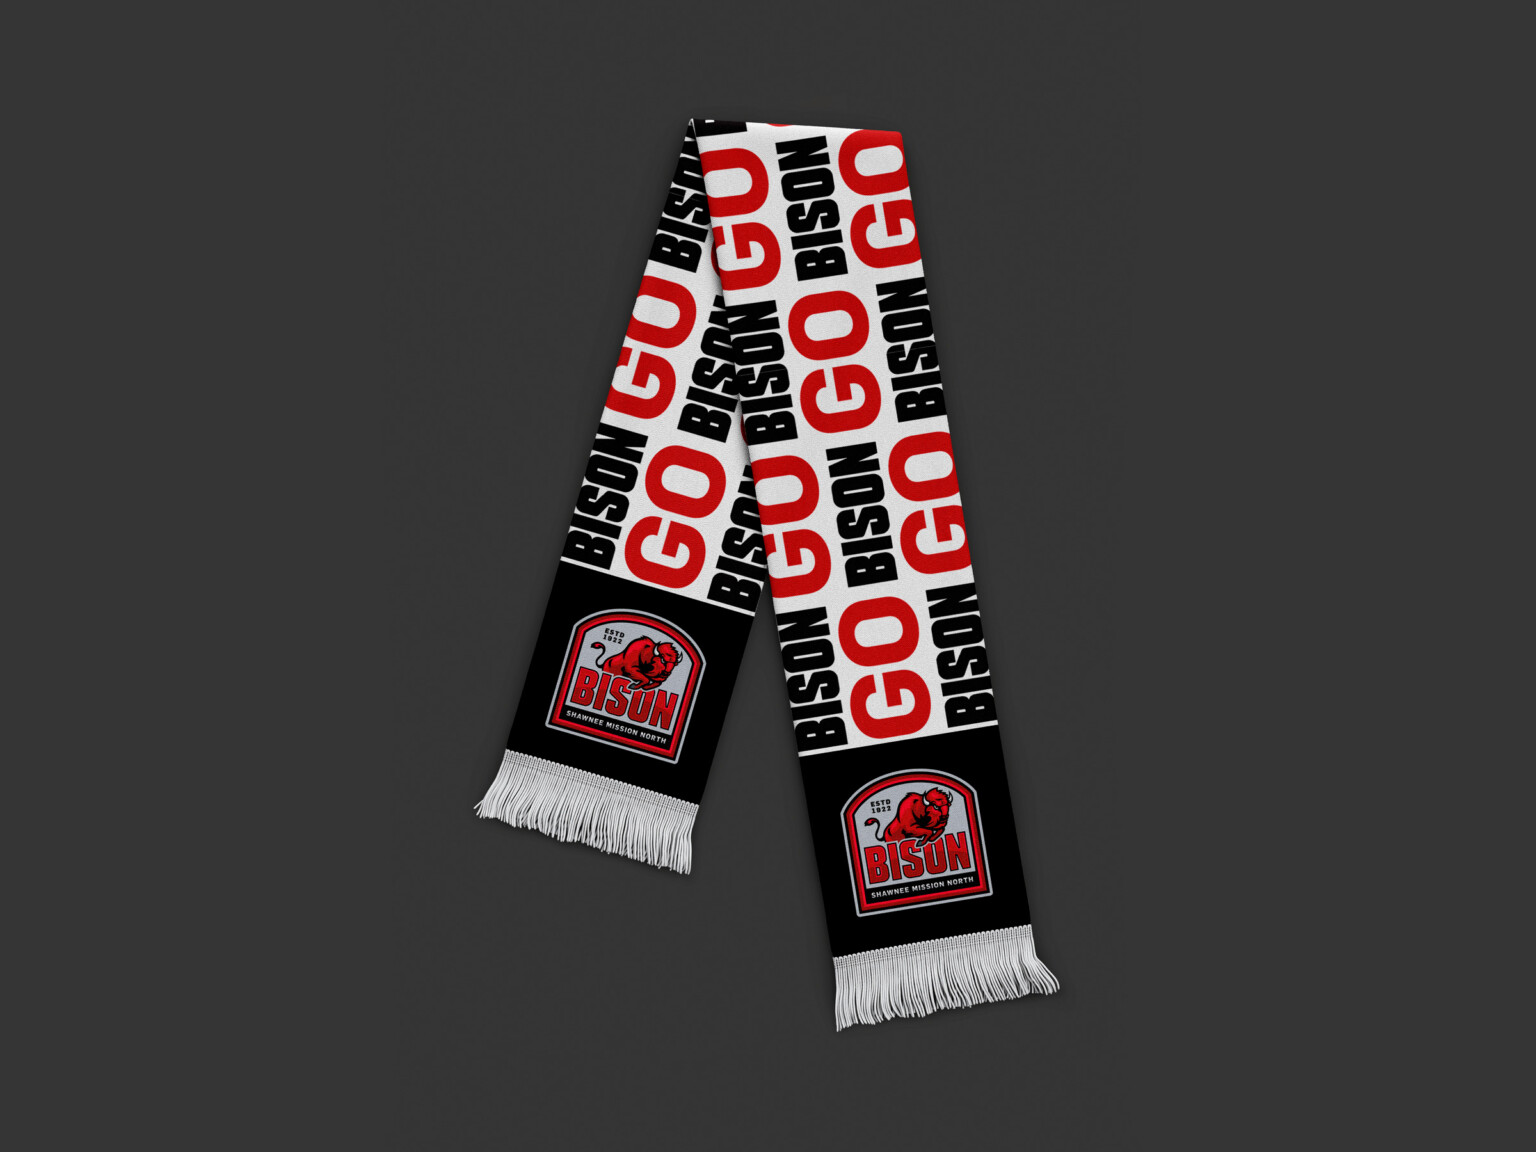 Black white and red scarf with go bison written over it in a pattern